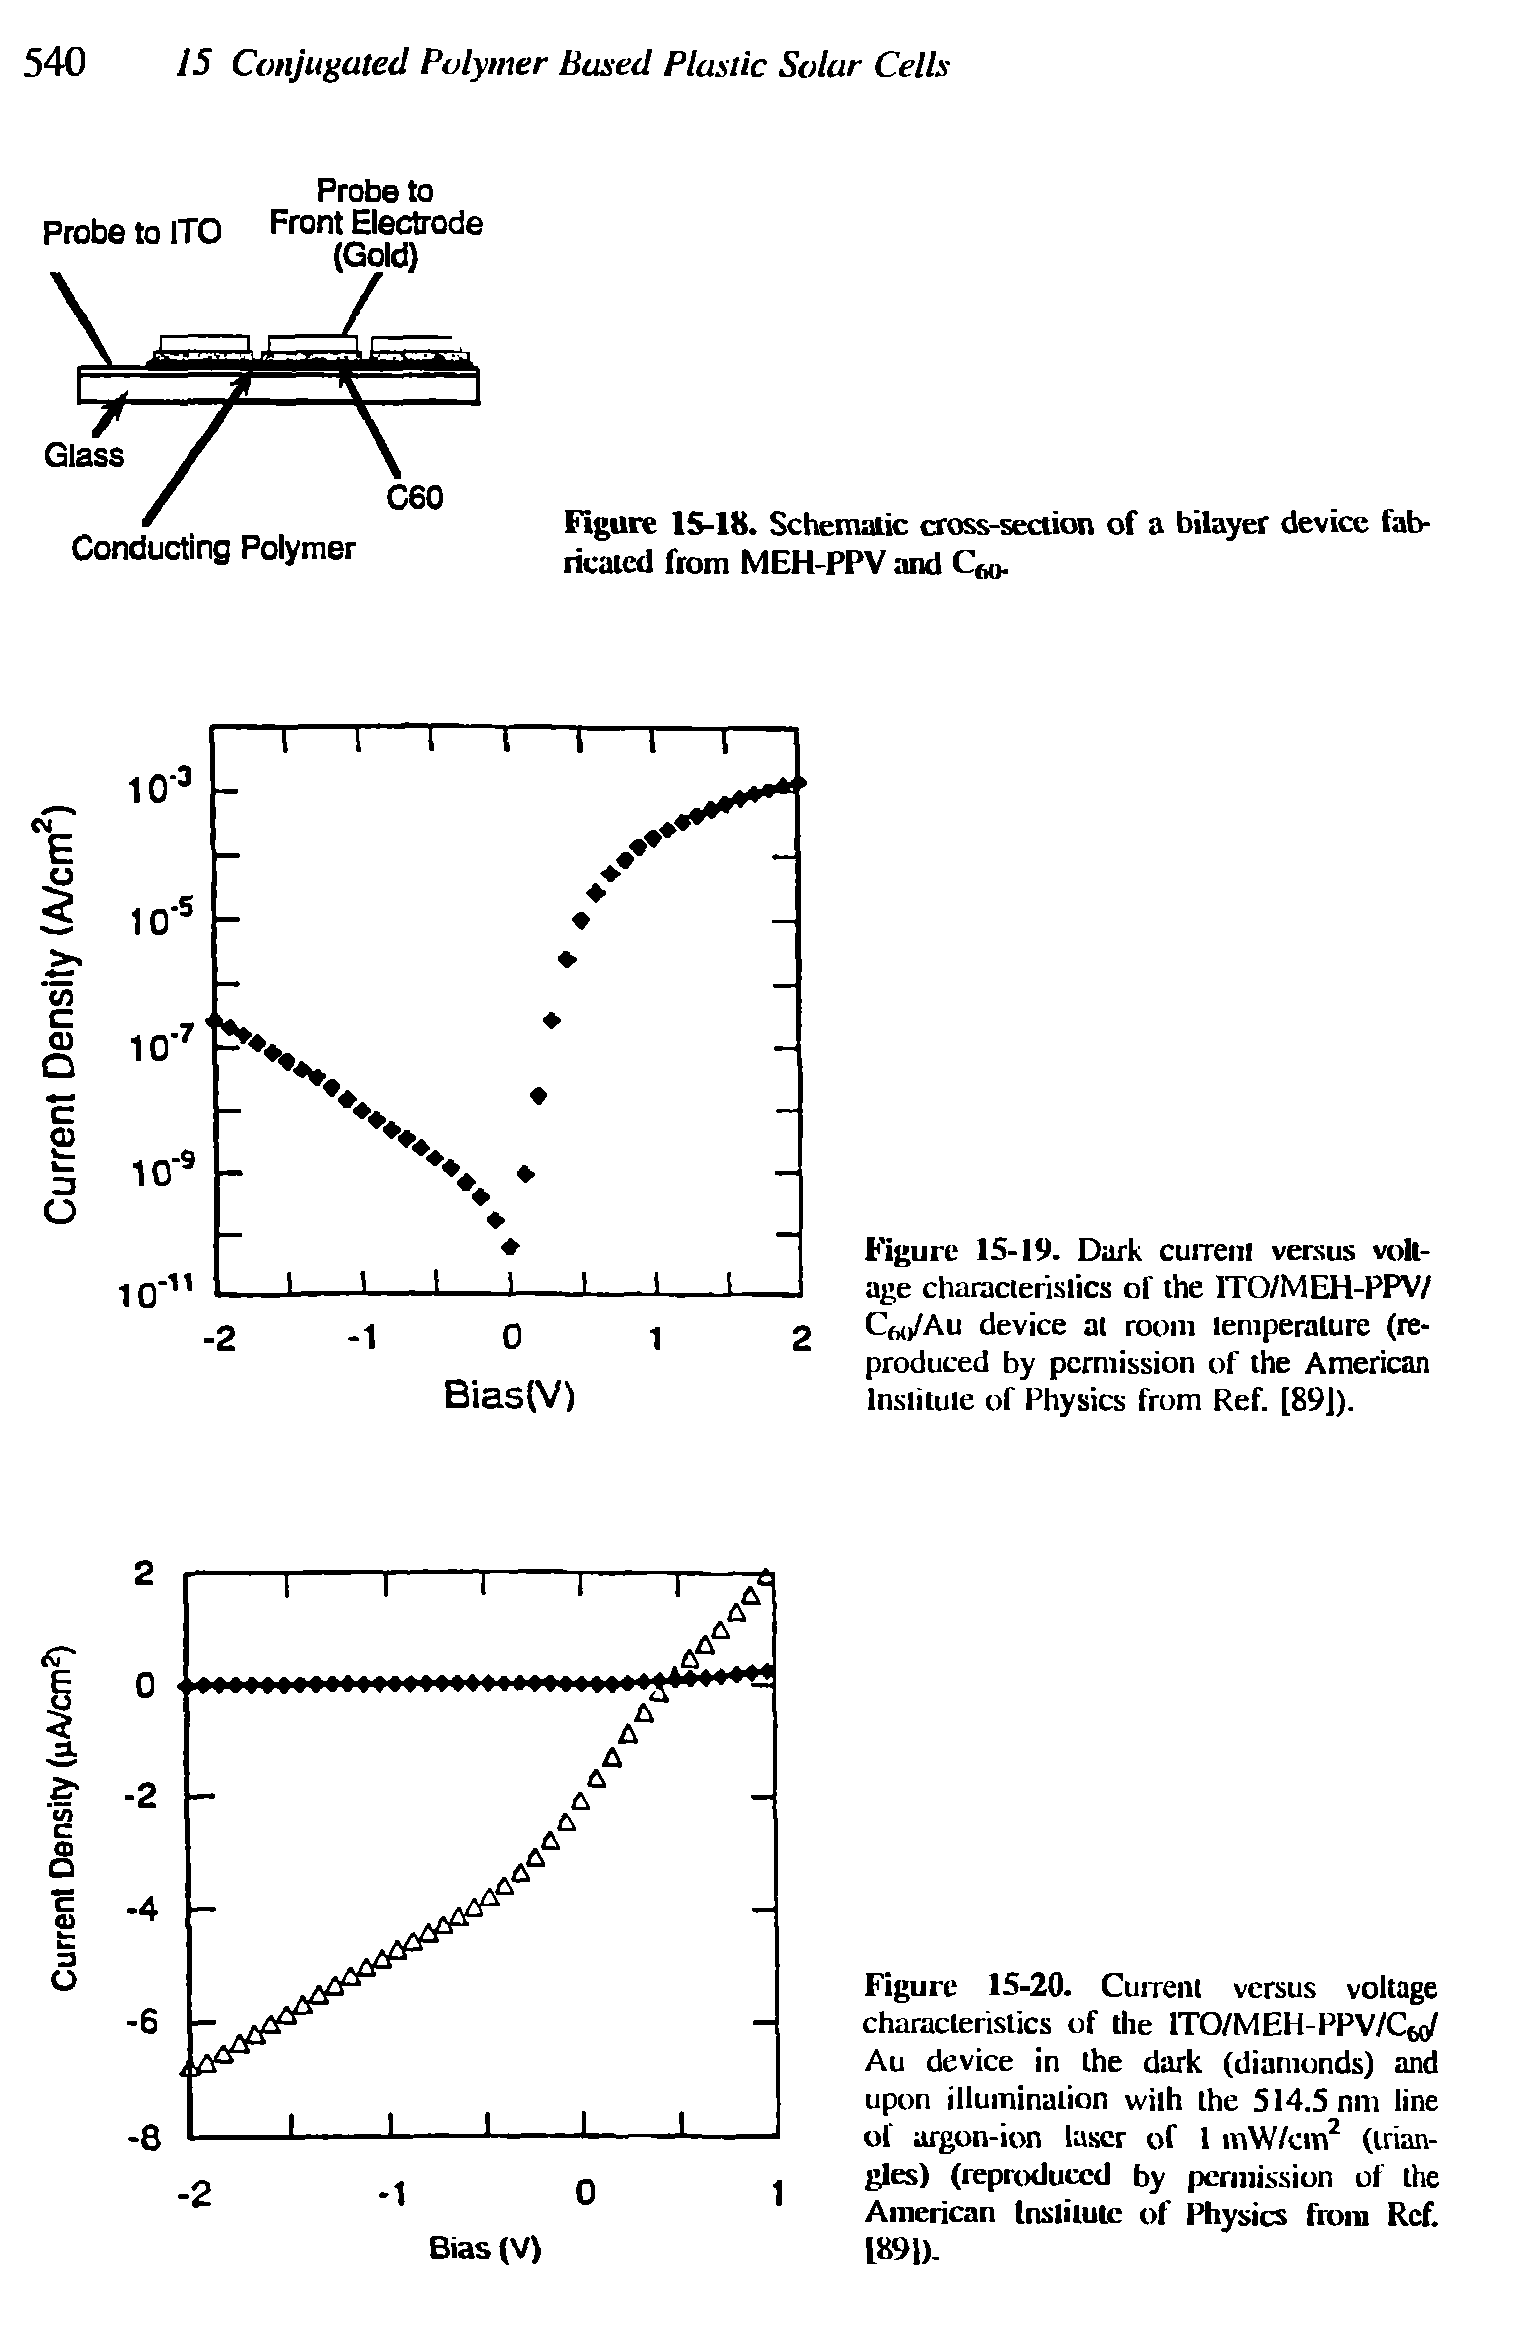 Figure 15-19. Dark currenl versus voltage characteristics of the 1TO/MEH-PPV/ C(l /Au device at room temperature (reproduced by permission of the American Institute of Physics from Ref. [89]).